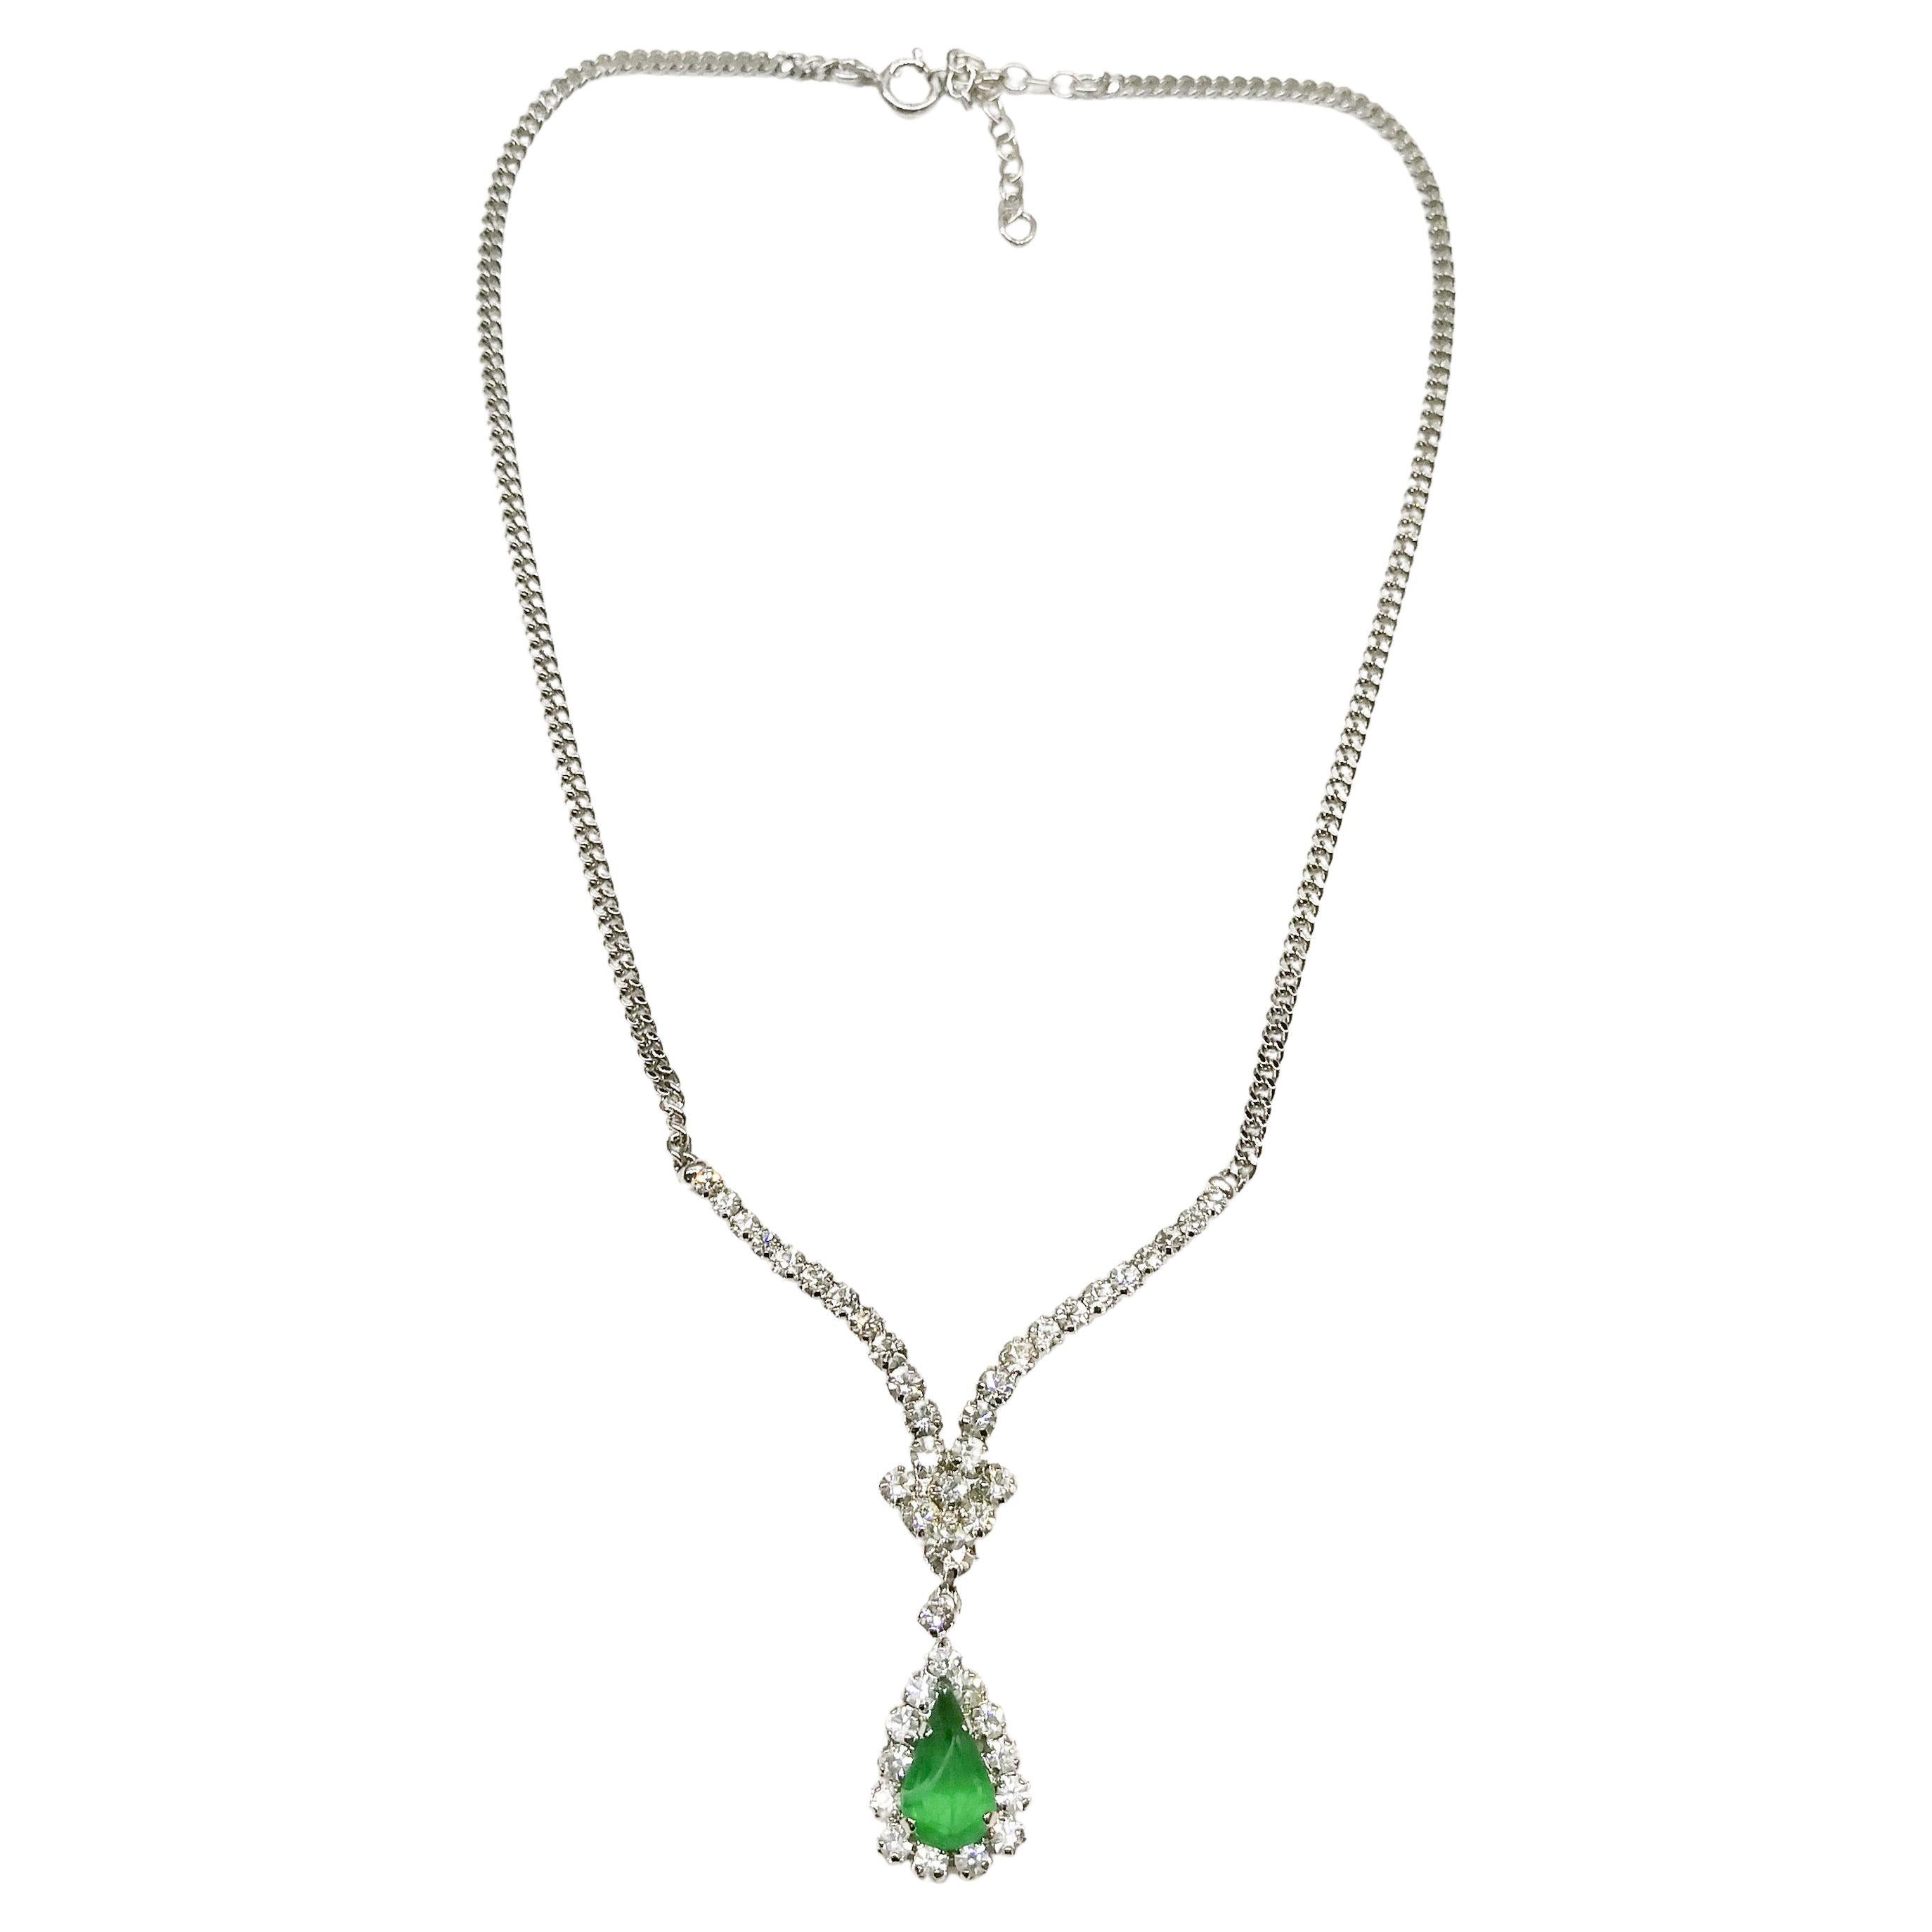 A delicate emerald and clear paste pendant necklace, Christian Dior, 1970s